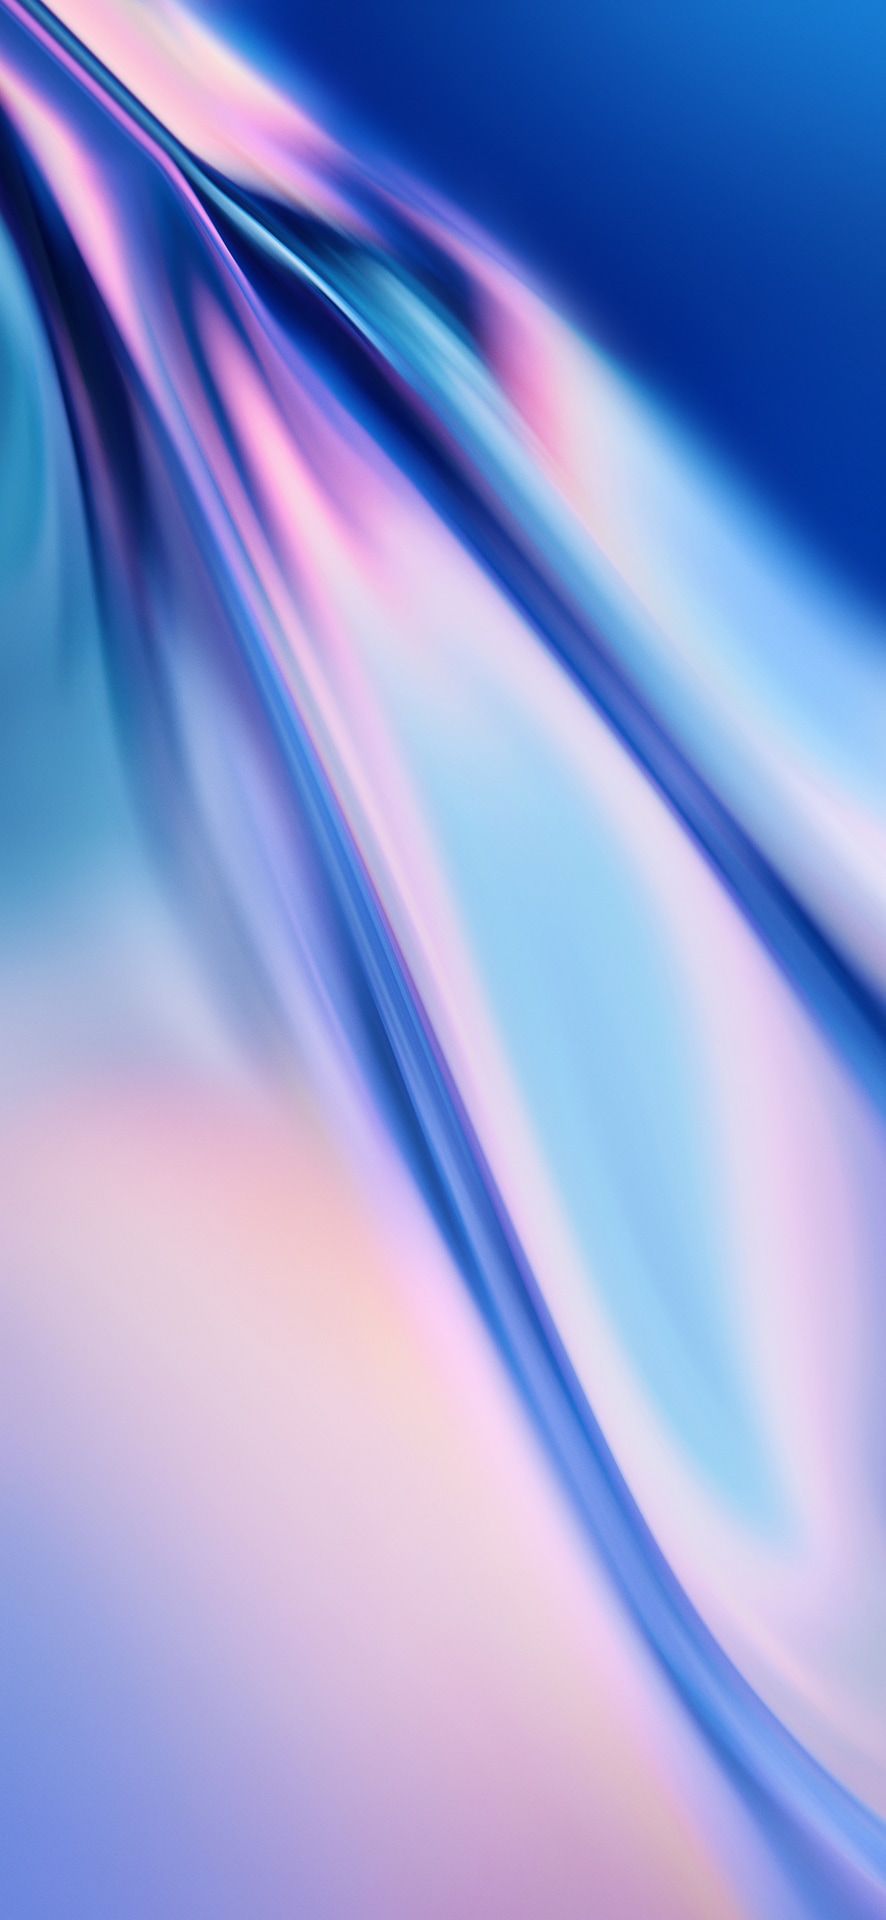 Download the colorful new OnePlus 7 Pro wallpaper here